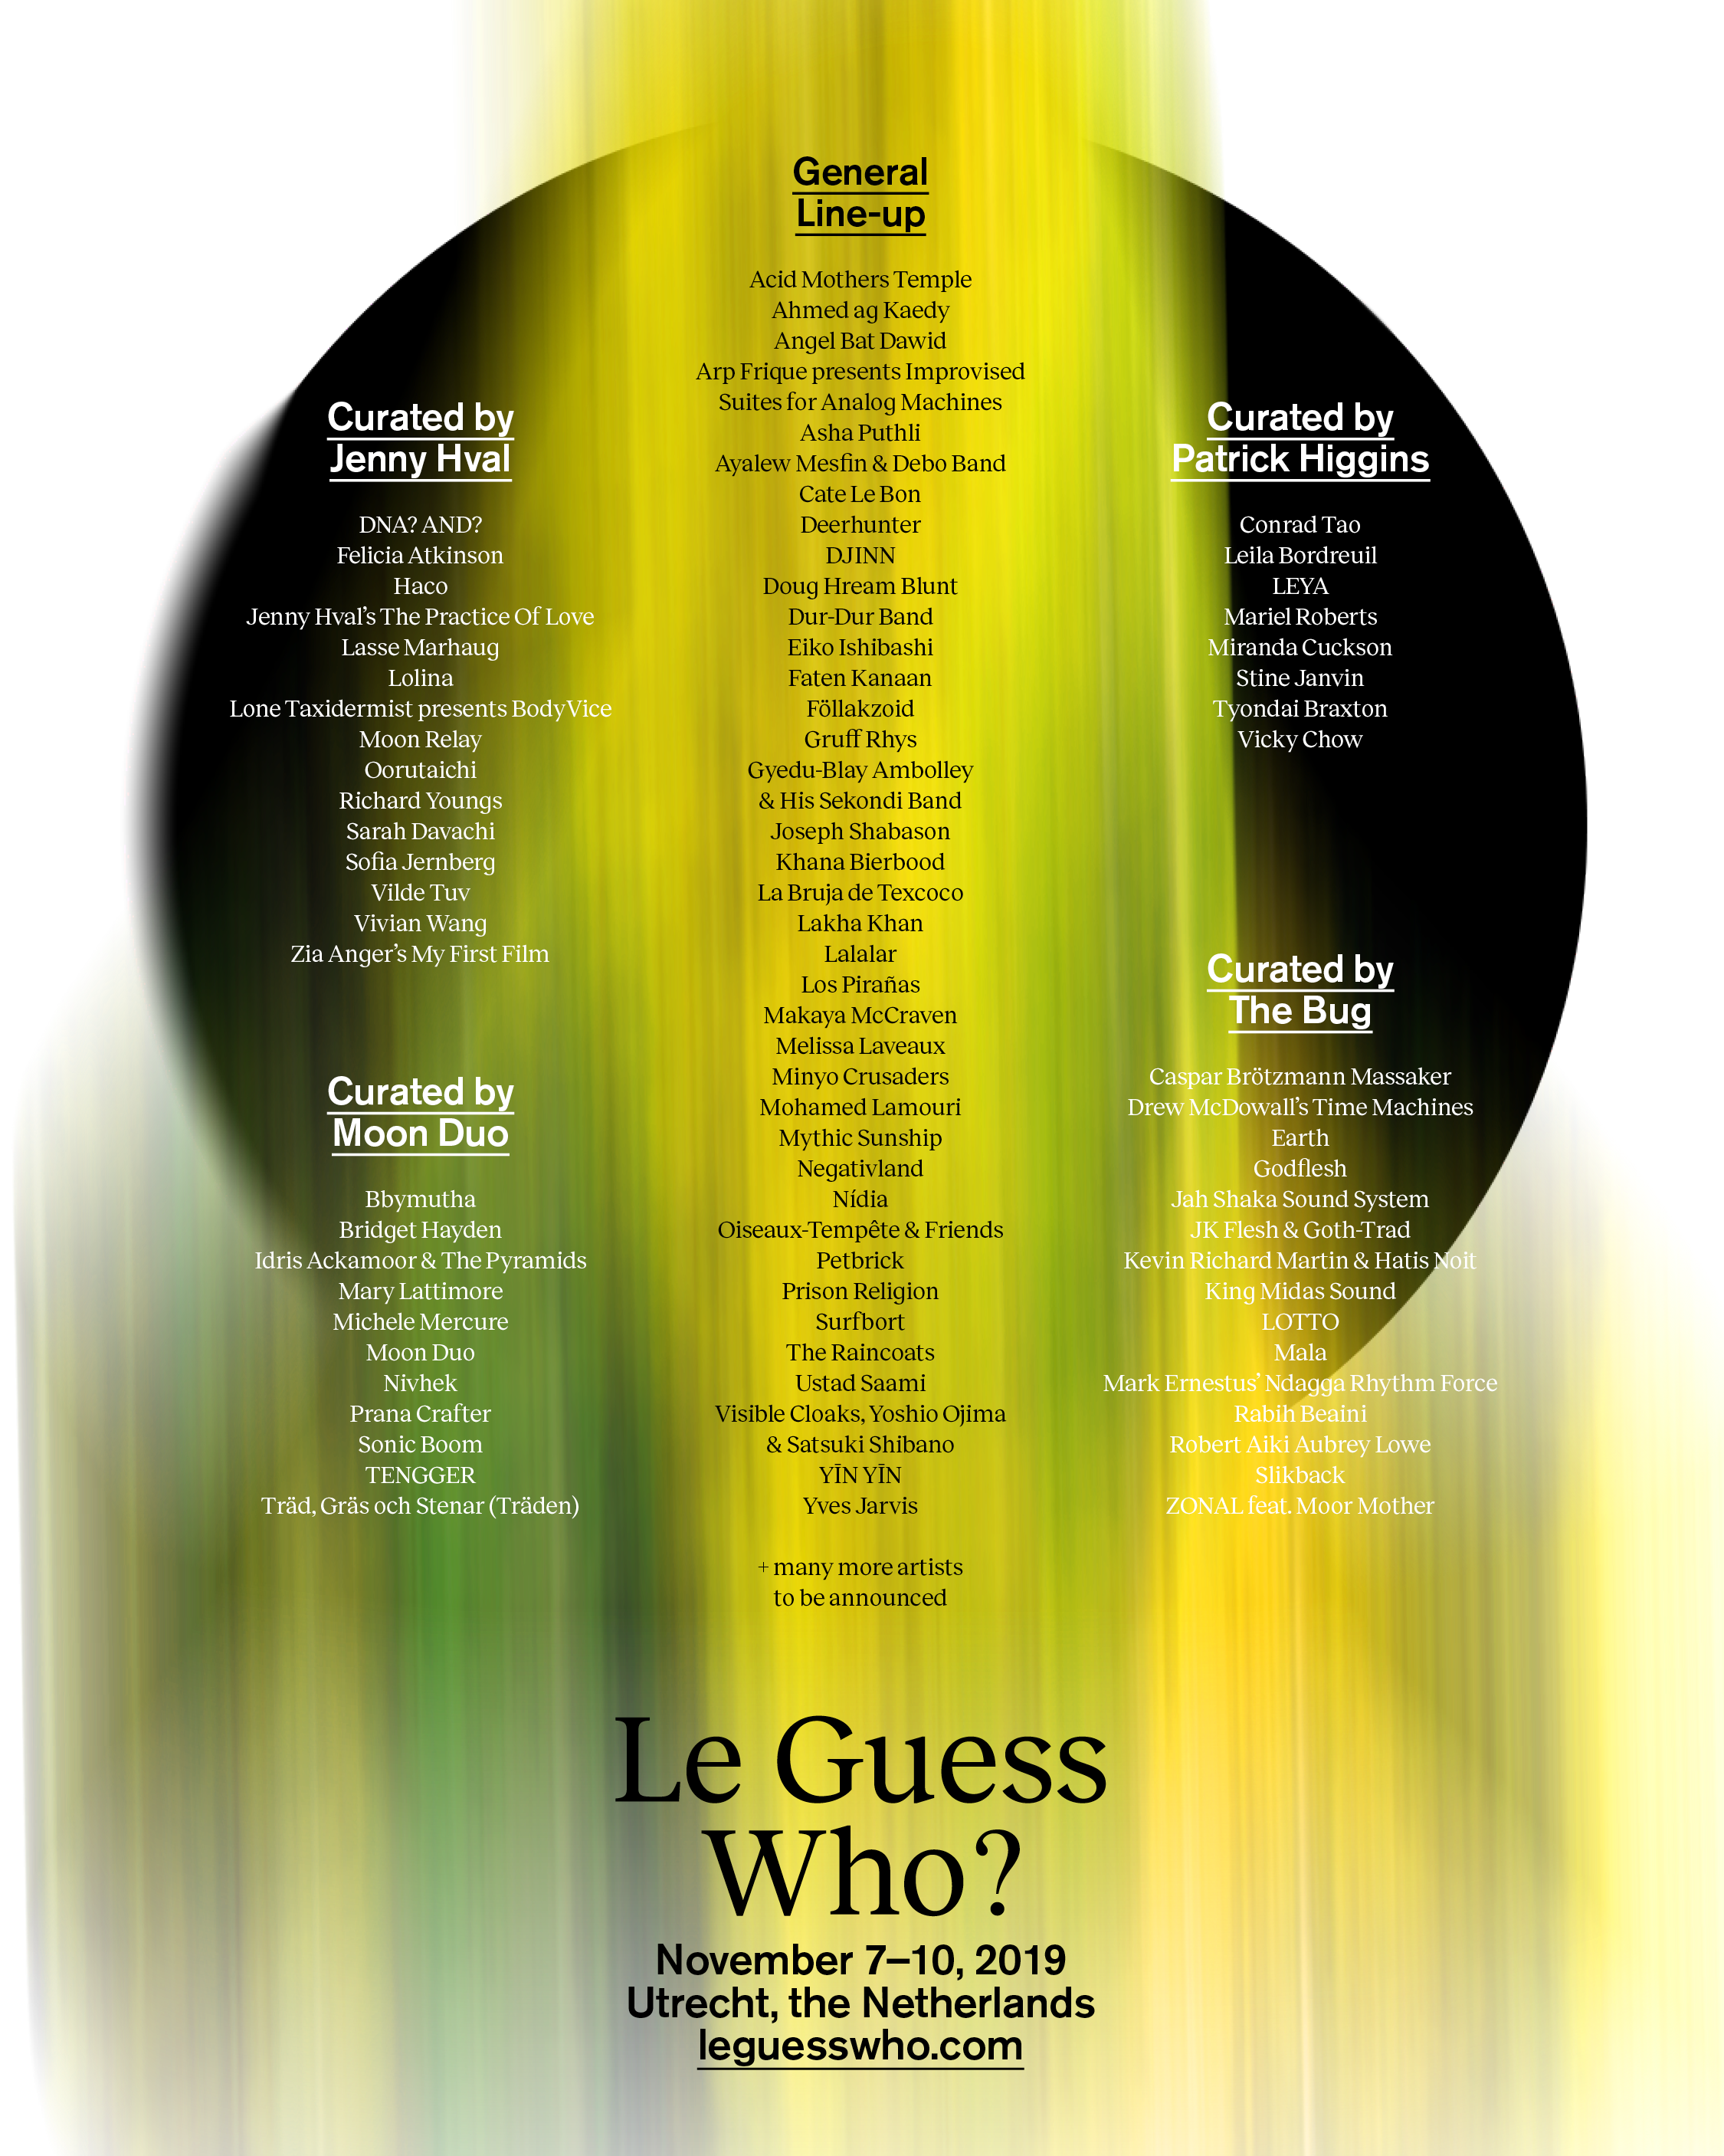 Revealing the initial line-up for Le Guess Who? 2019